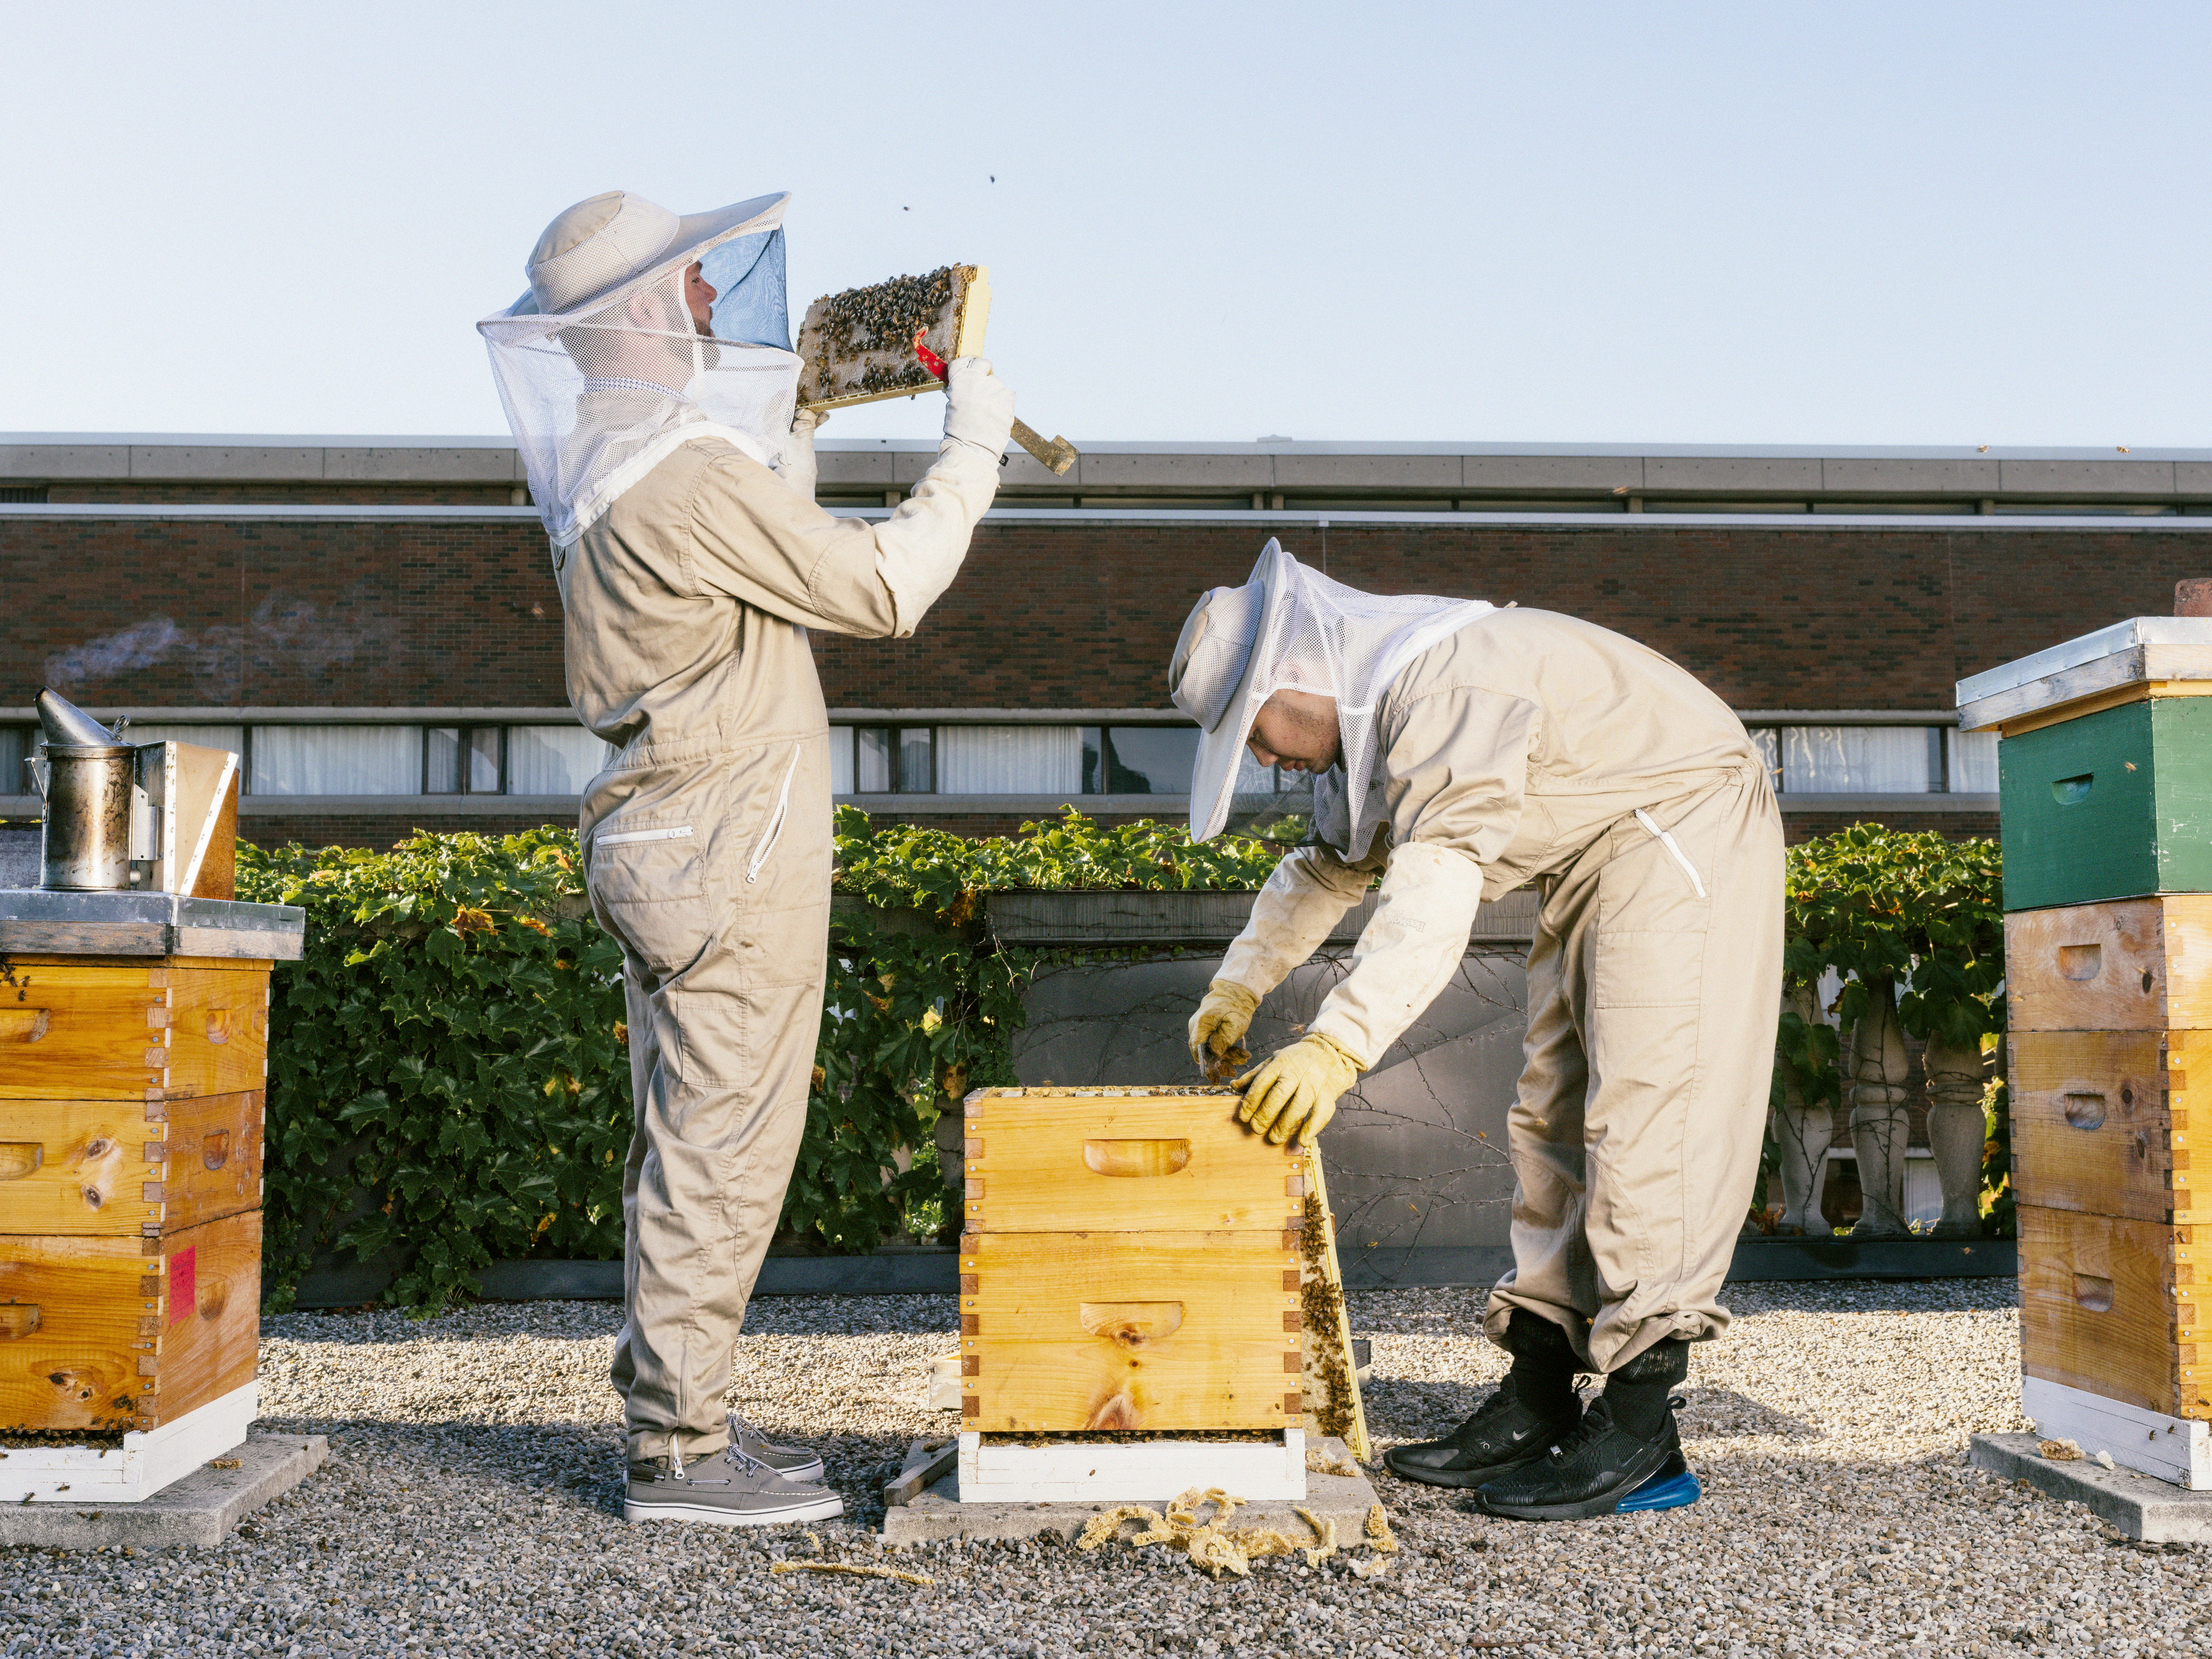 Two beekeepers inspect a hive on the roof of the Faculty Club at U of T